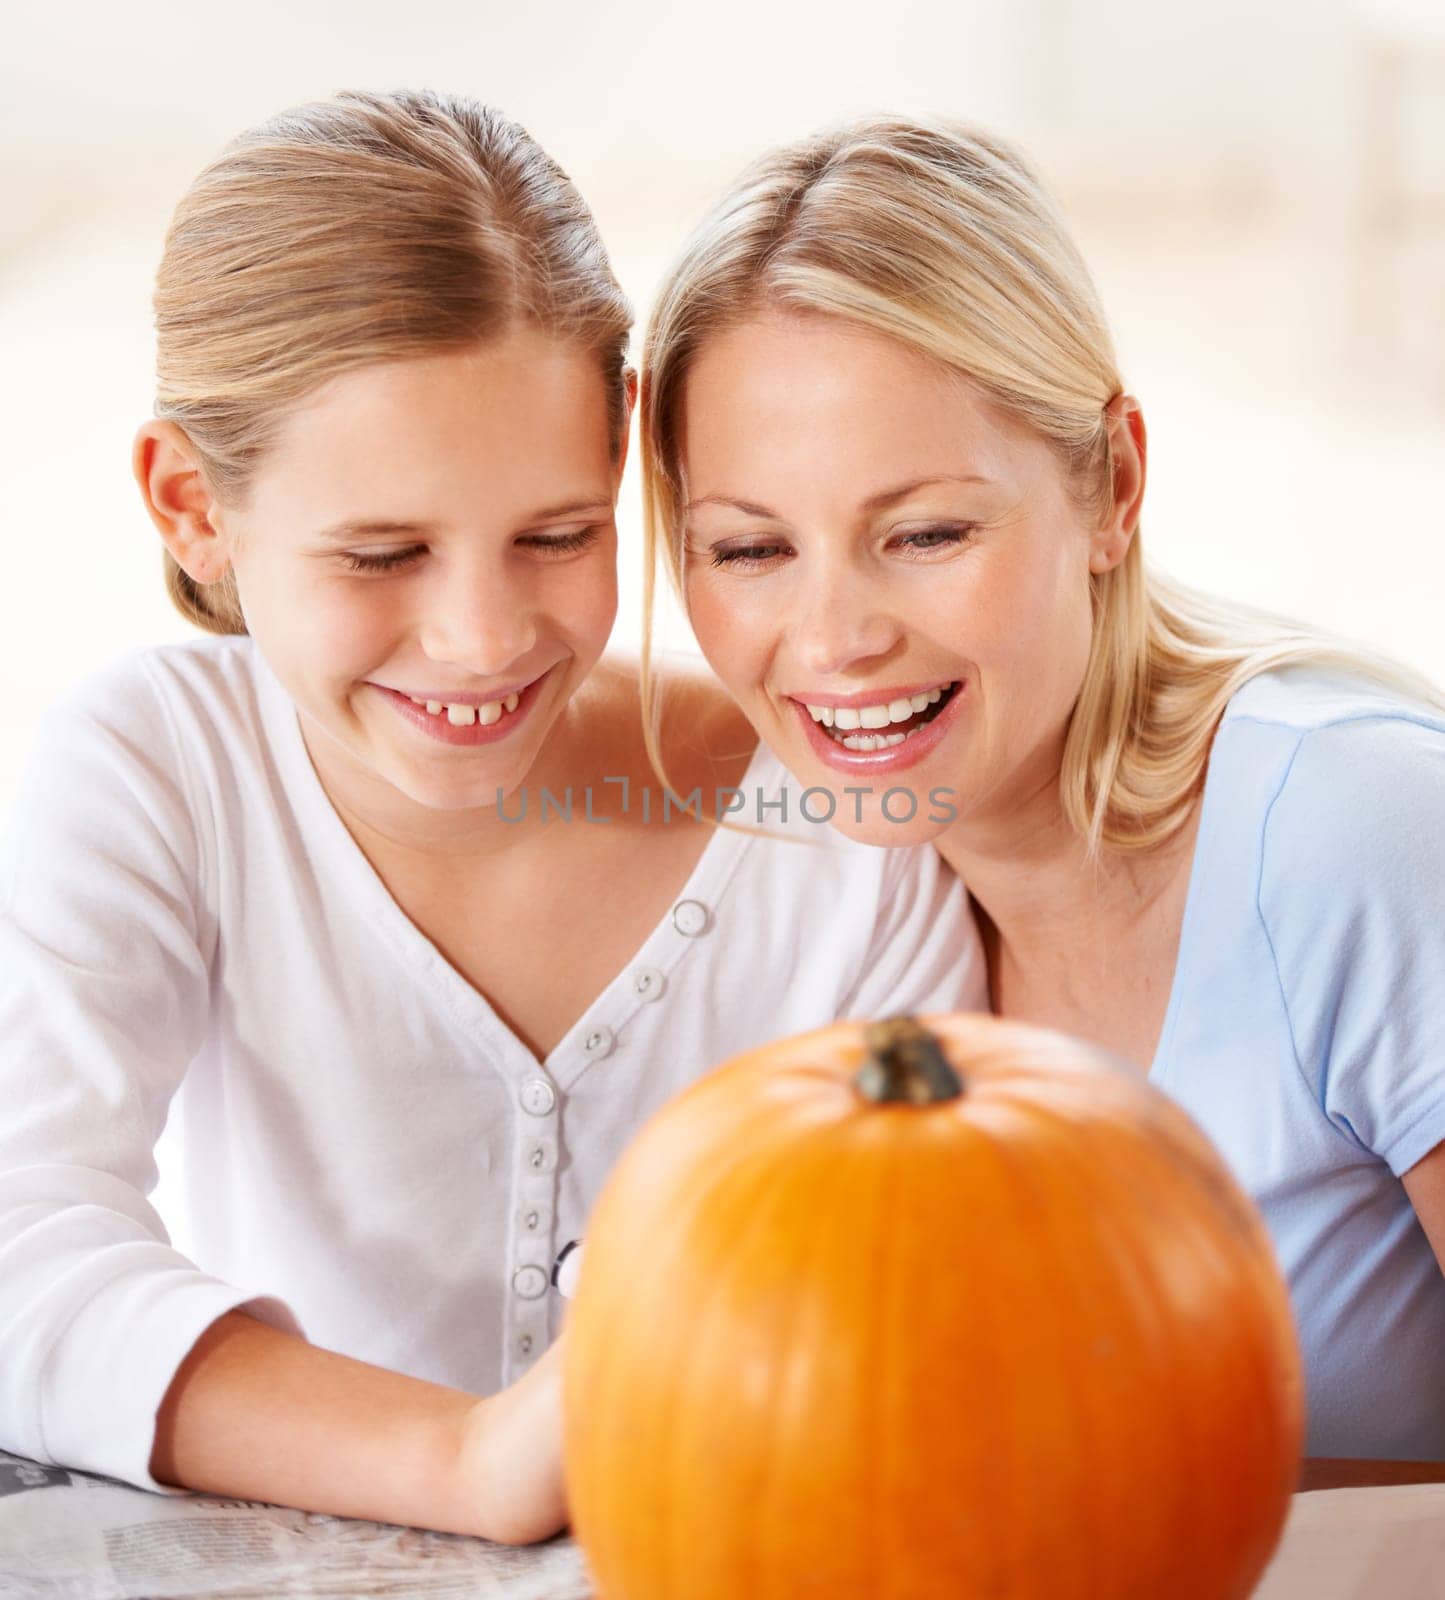 Child, mother and smile with pumpkin to celebrate halloween party together at home. Happy young girl, mom and family carving orange vegetable for holiday lantern, decoration and fun creative craft.